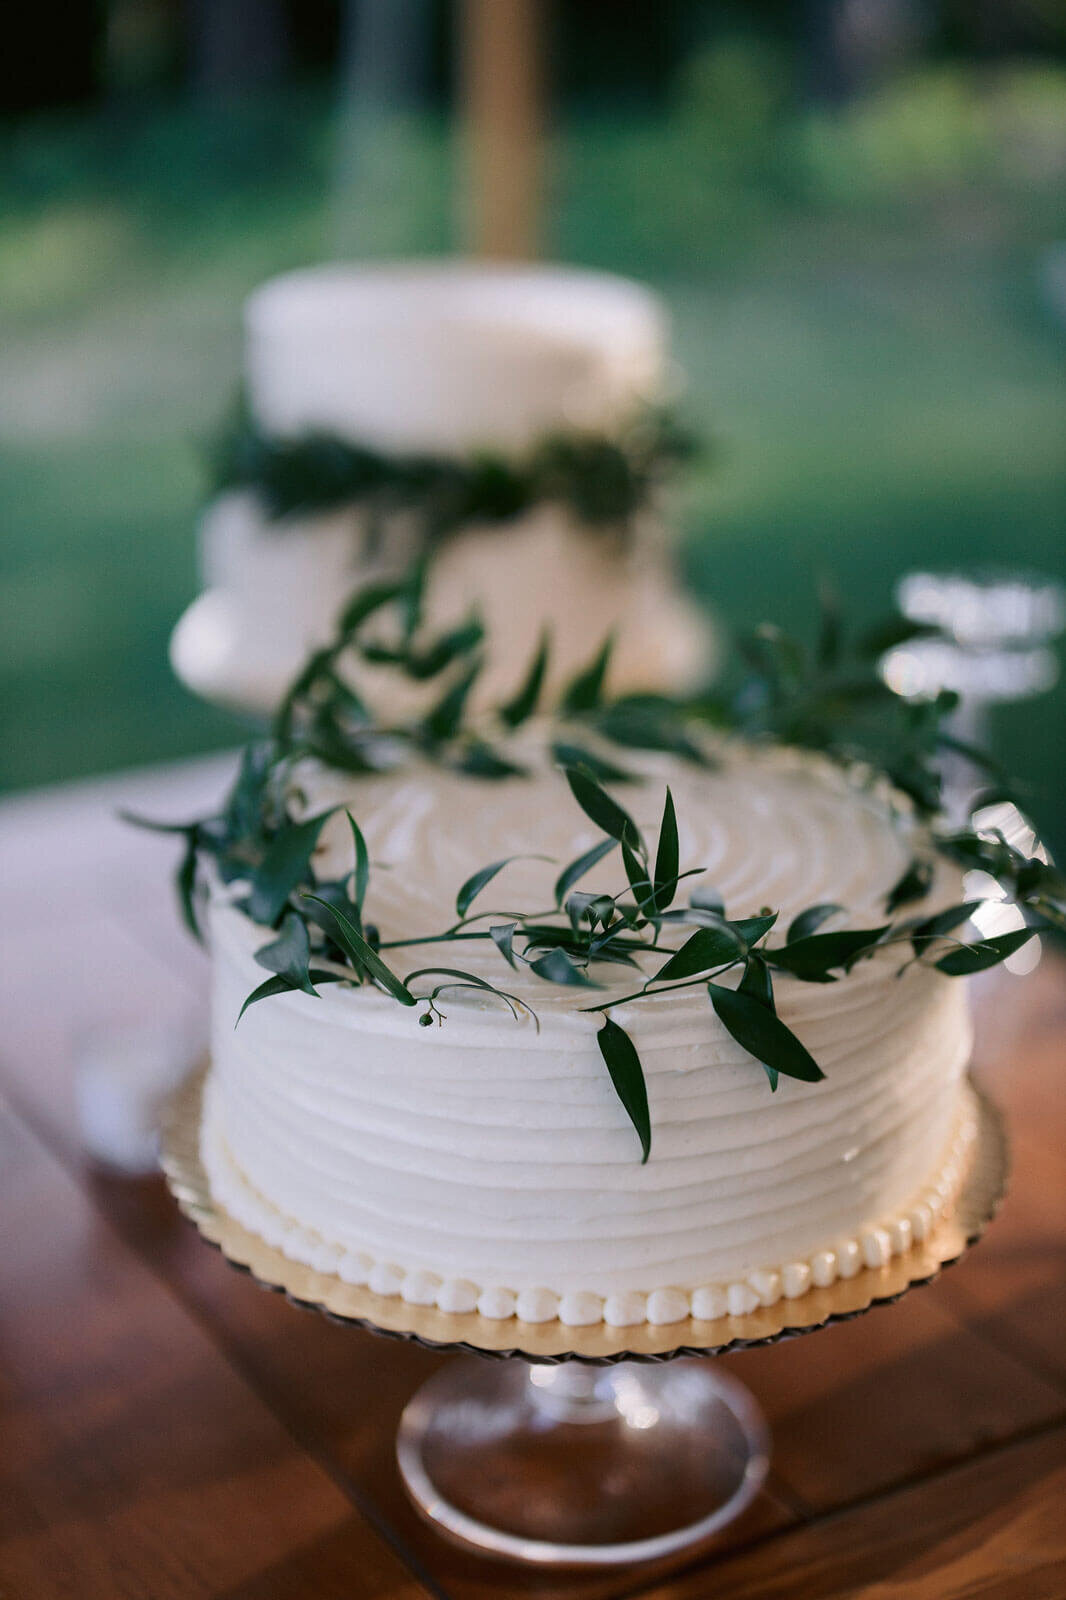 A one-layer white wedding cake, decorated with green leaves positioned in a circle on top, in Cape Cod Summer Tent, MA